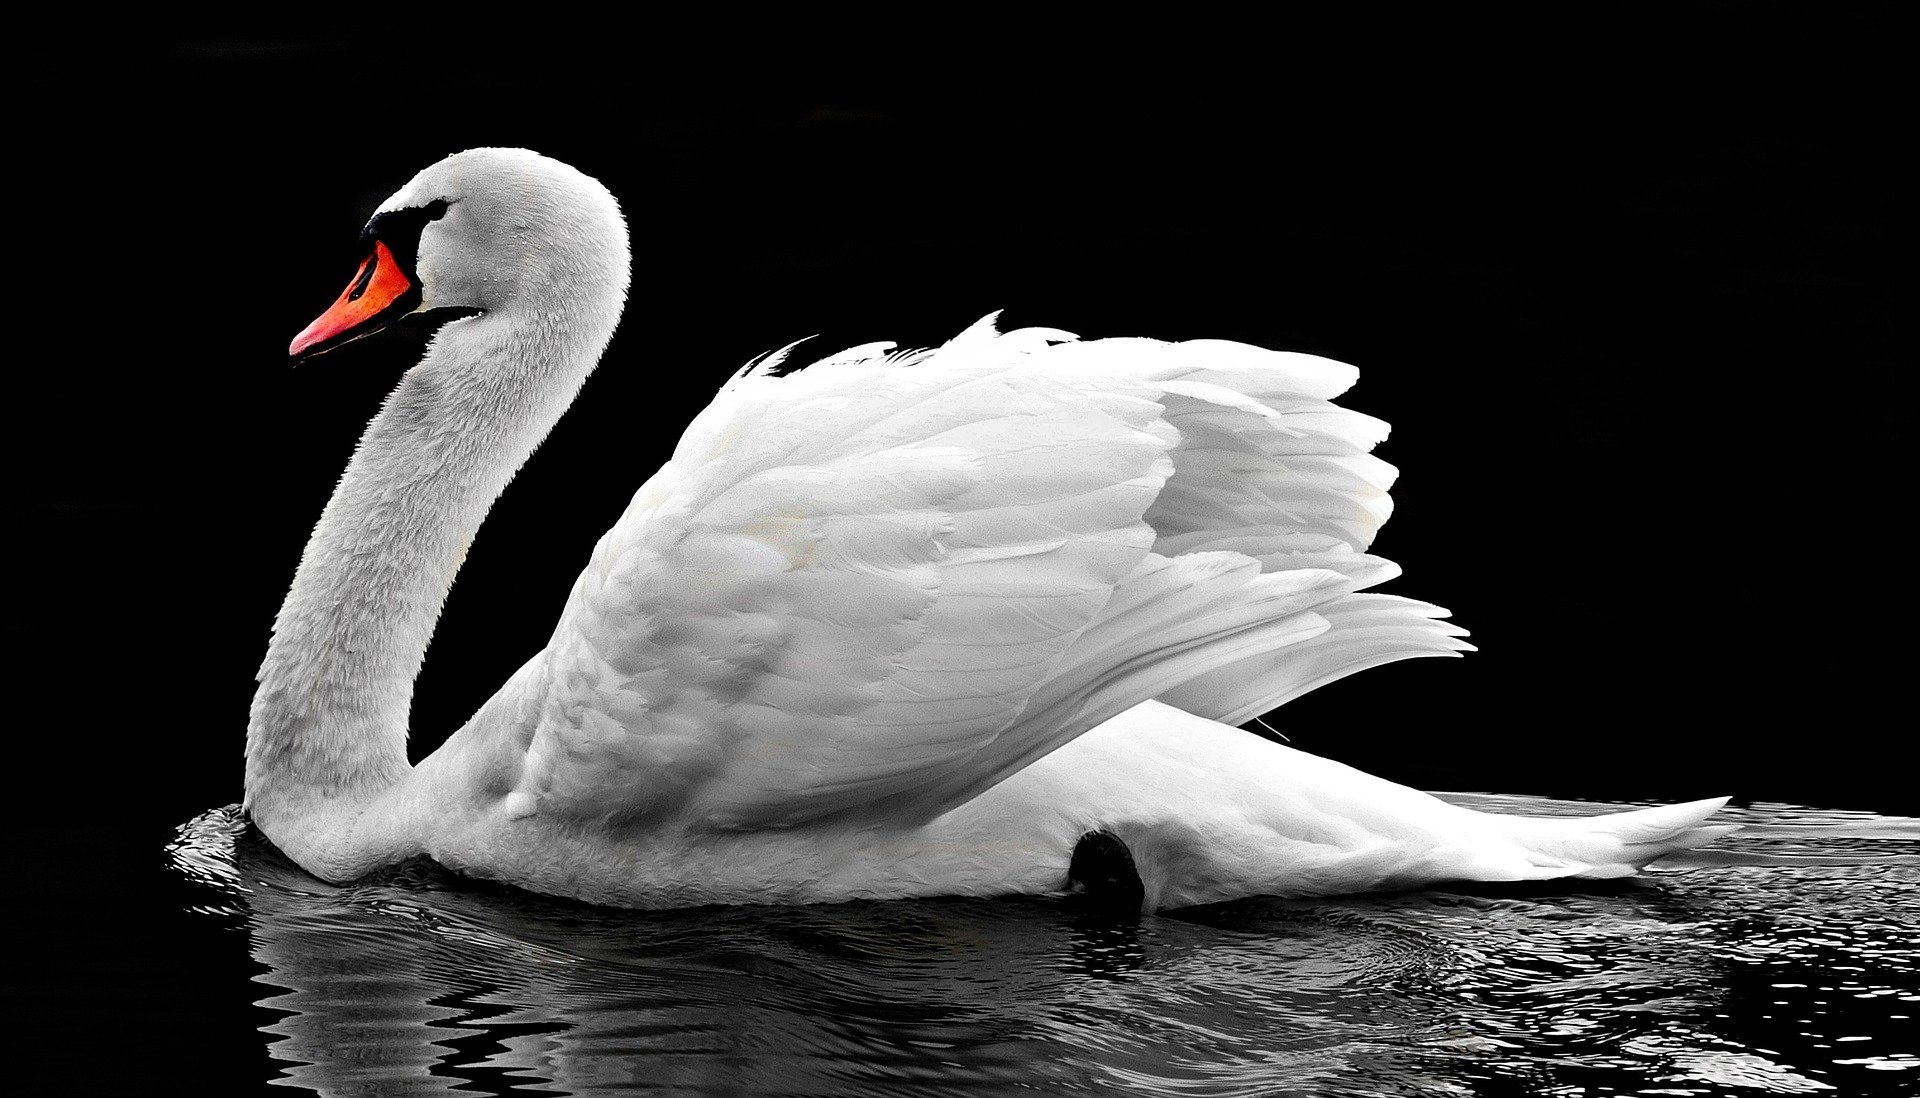 A swan swimming on a sunny day. | Source: Pixabay.com